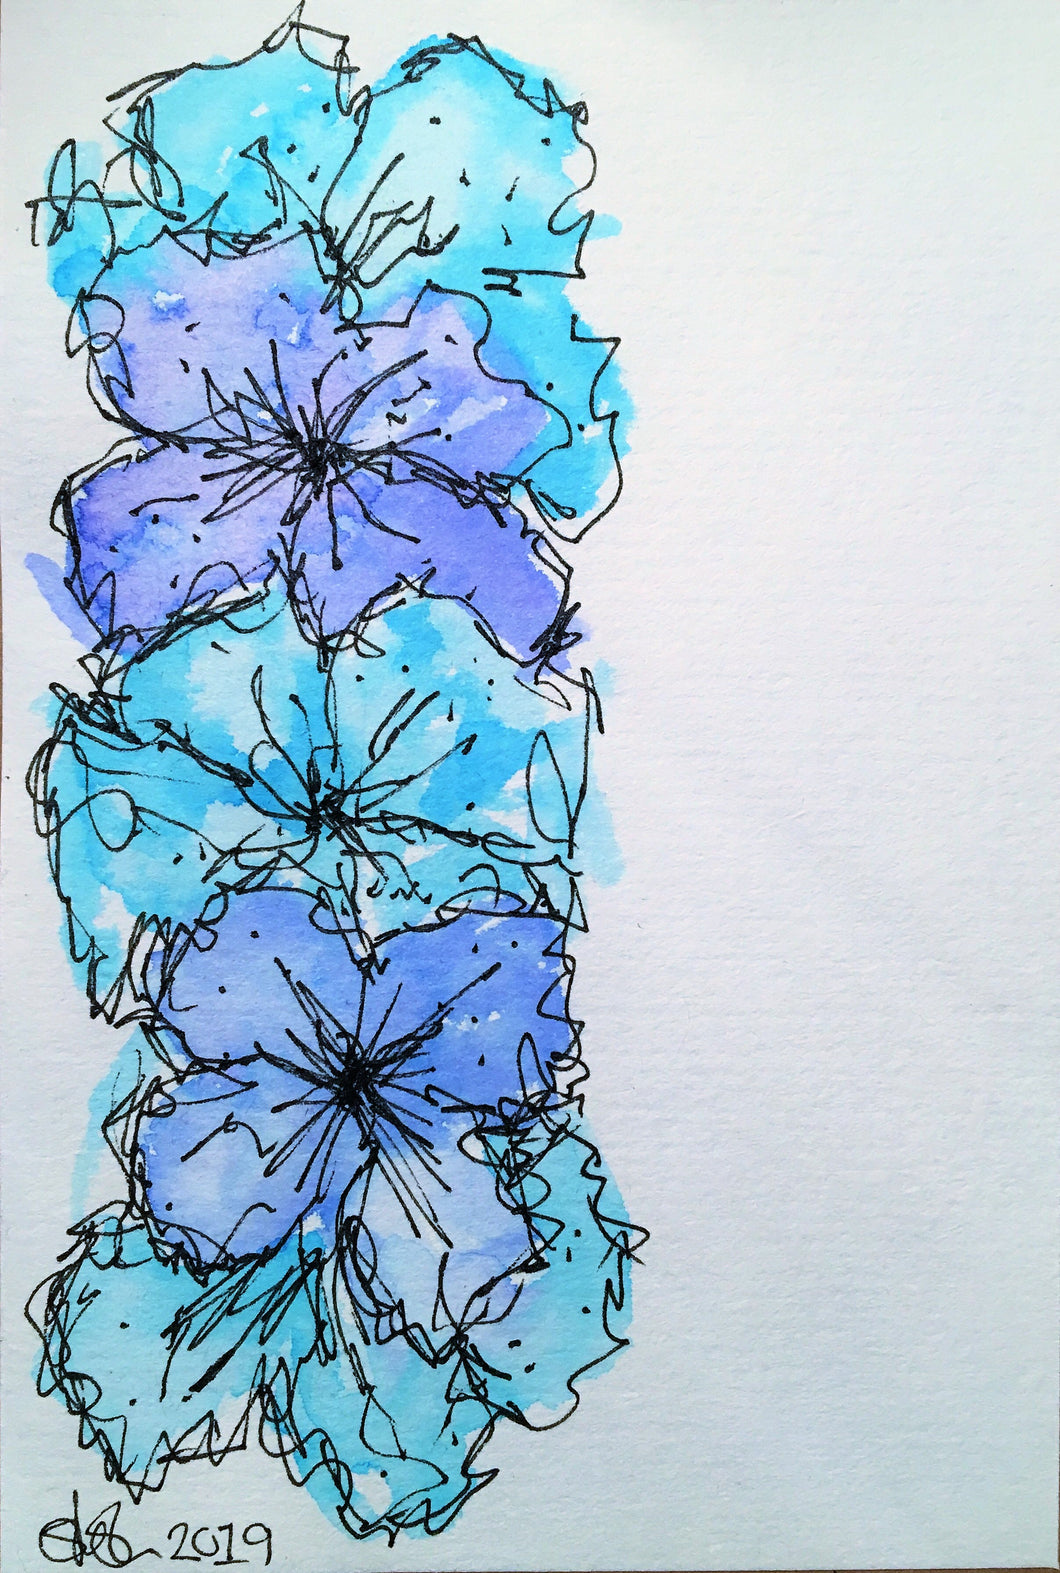 Handpainted Watercolour Greeting Card - Abstract Blue/Turquoise Medium Pansy Design - eDgE dEsiGn London